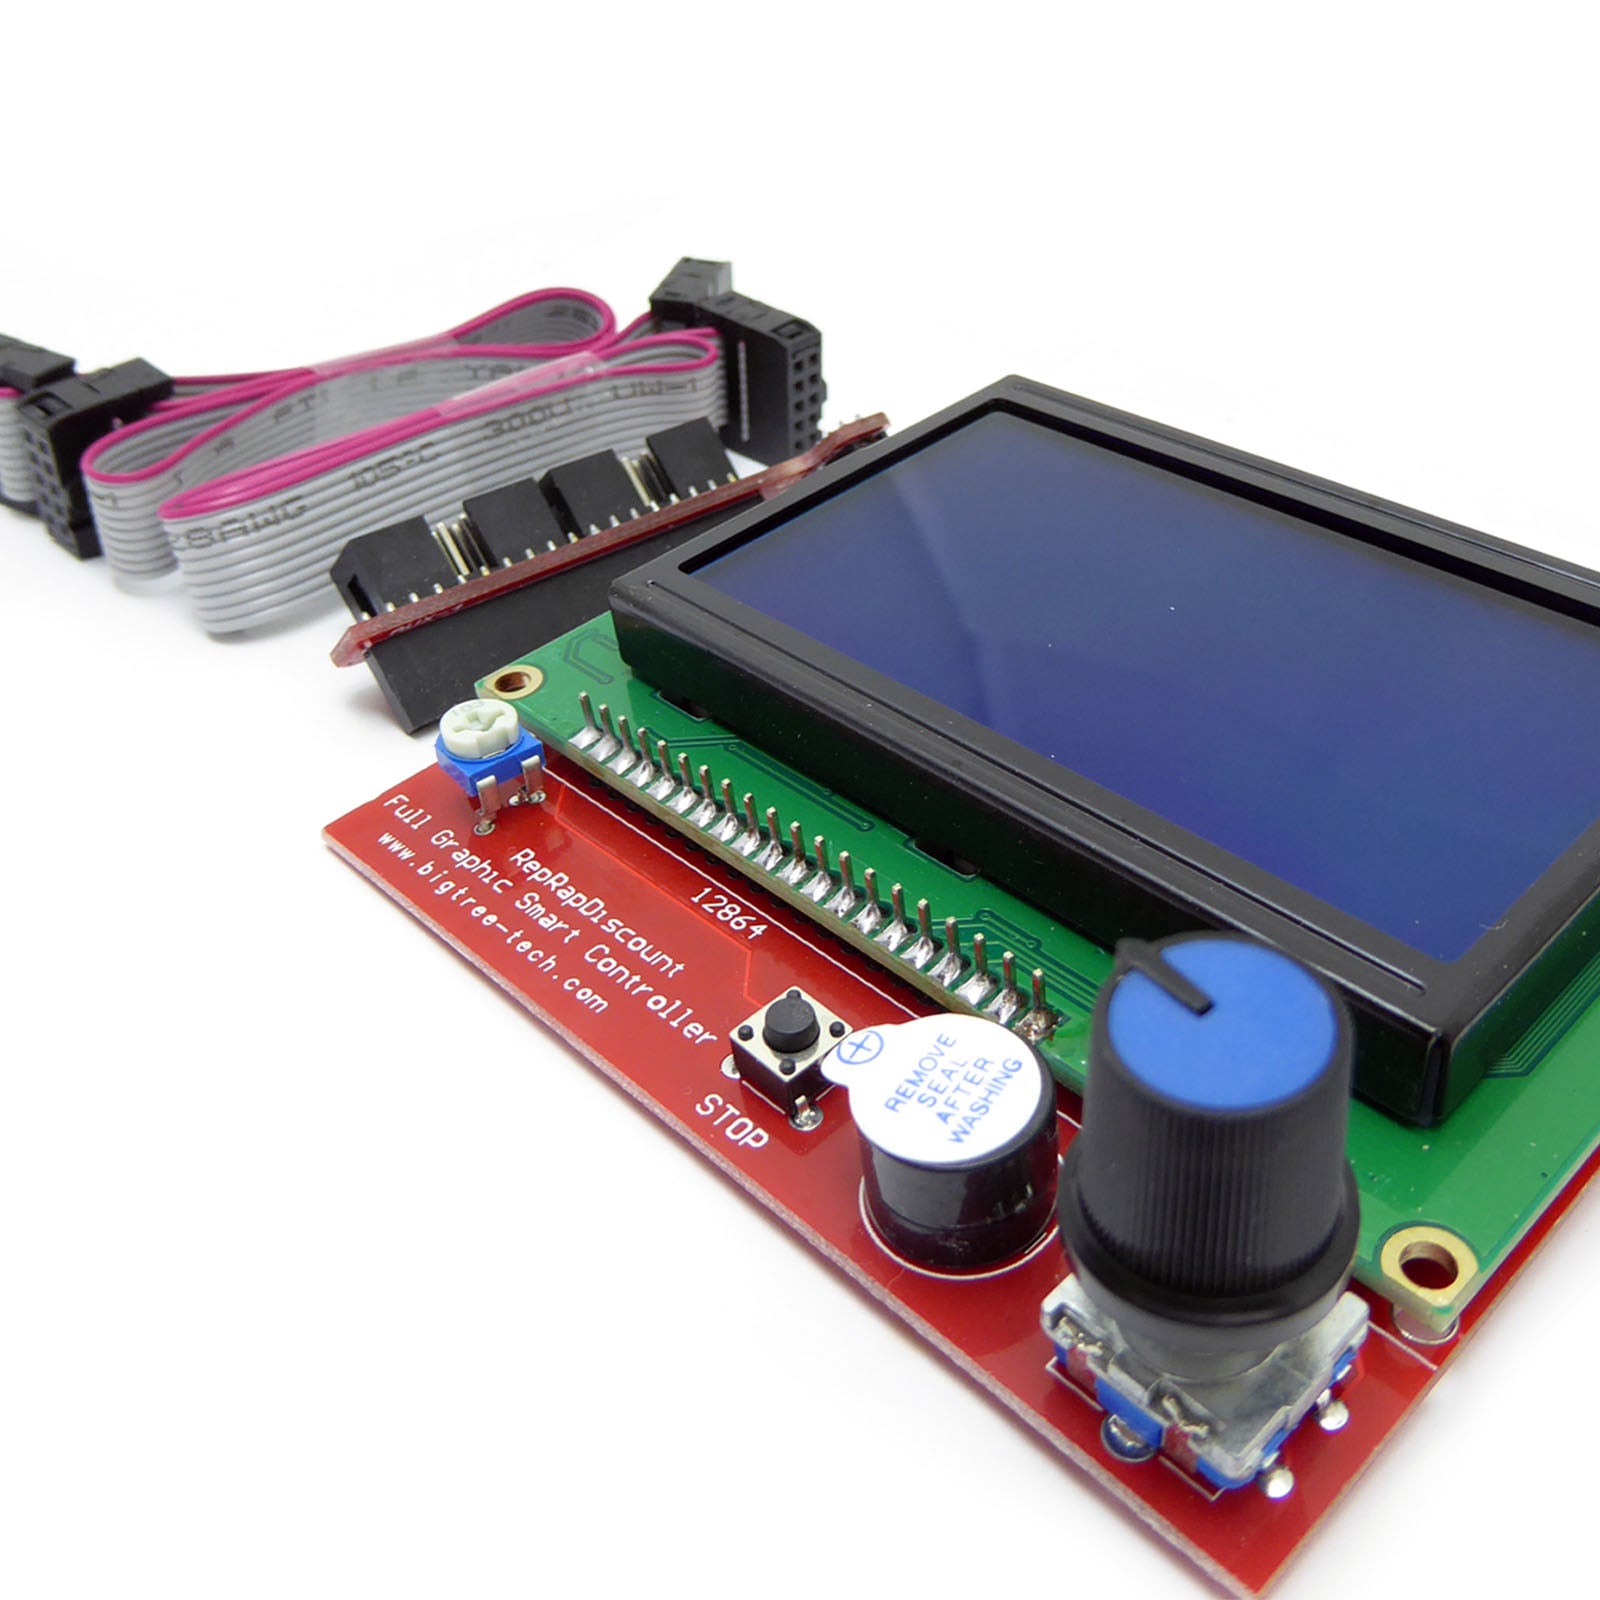 Graphic LCD Controller + SD Card Reader for RAMPS